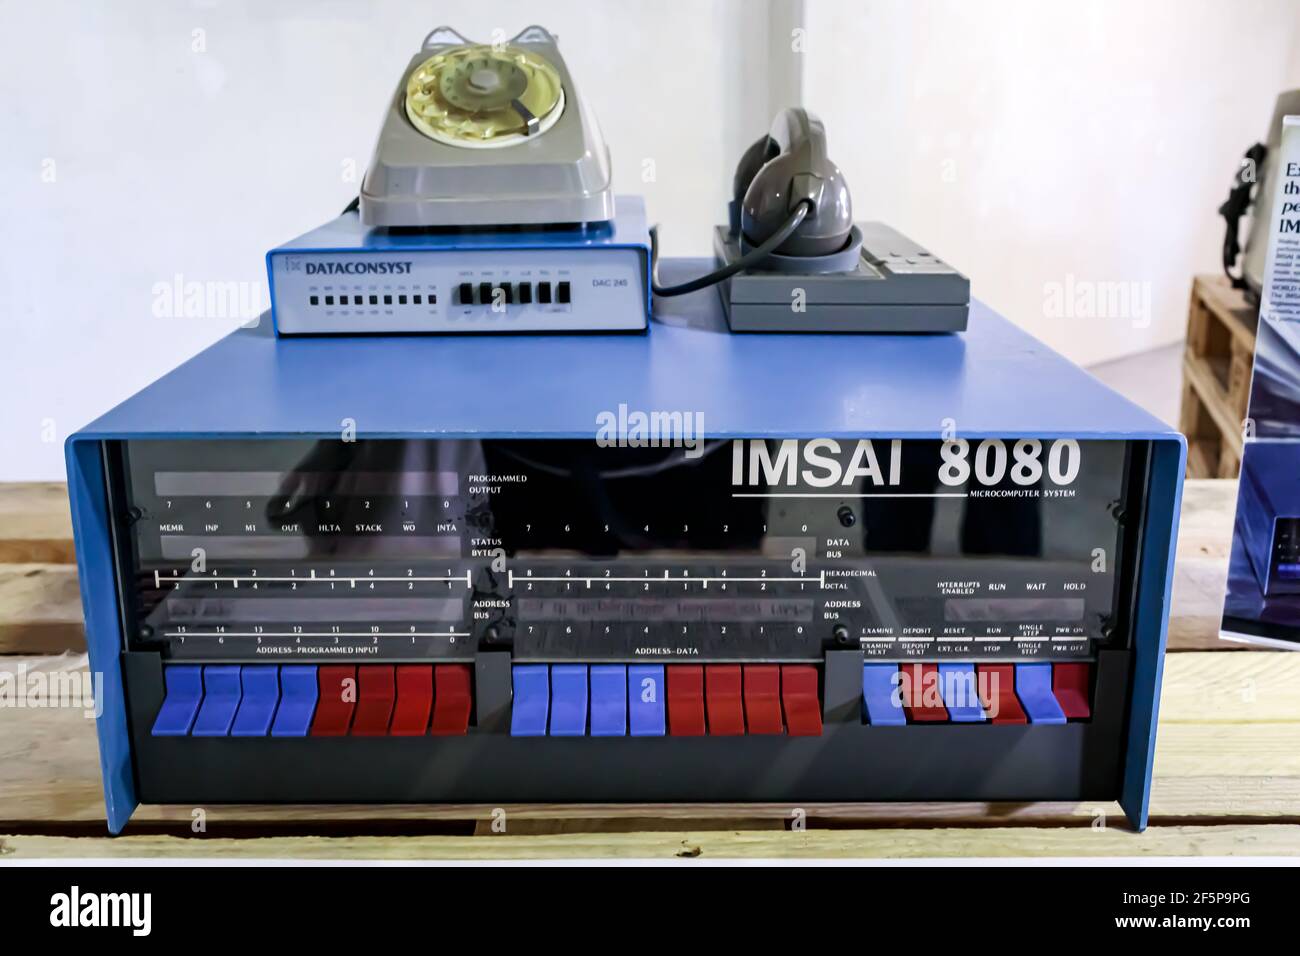 Rome, Italy - April 27, 2019: The IMSAI 8080 early microcomputer, one of the hacking tools used by the main character in the 1983 movie WarGames. Stock Photo